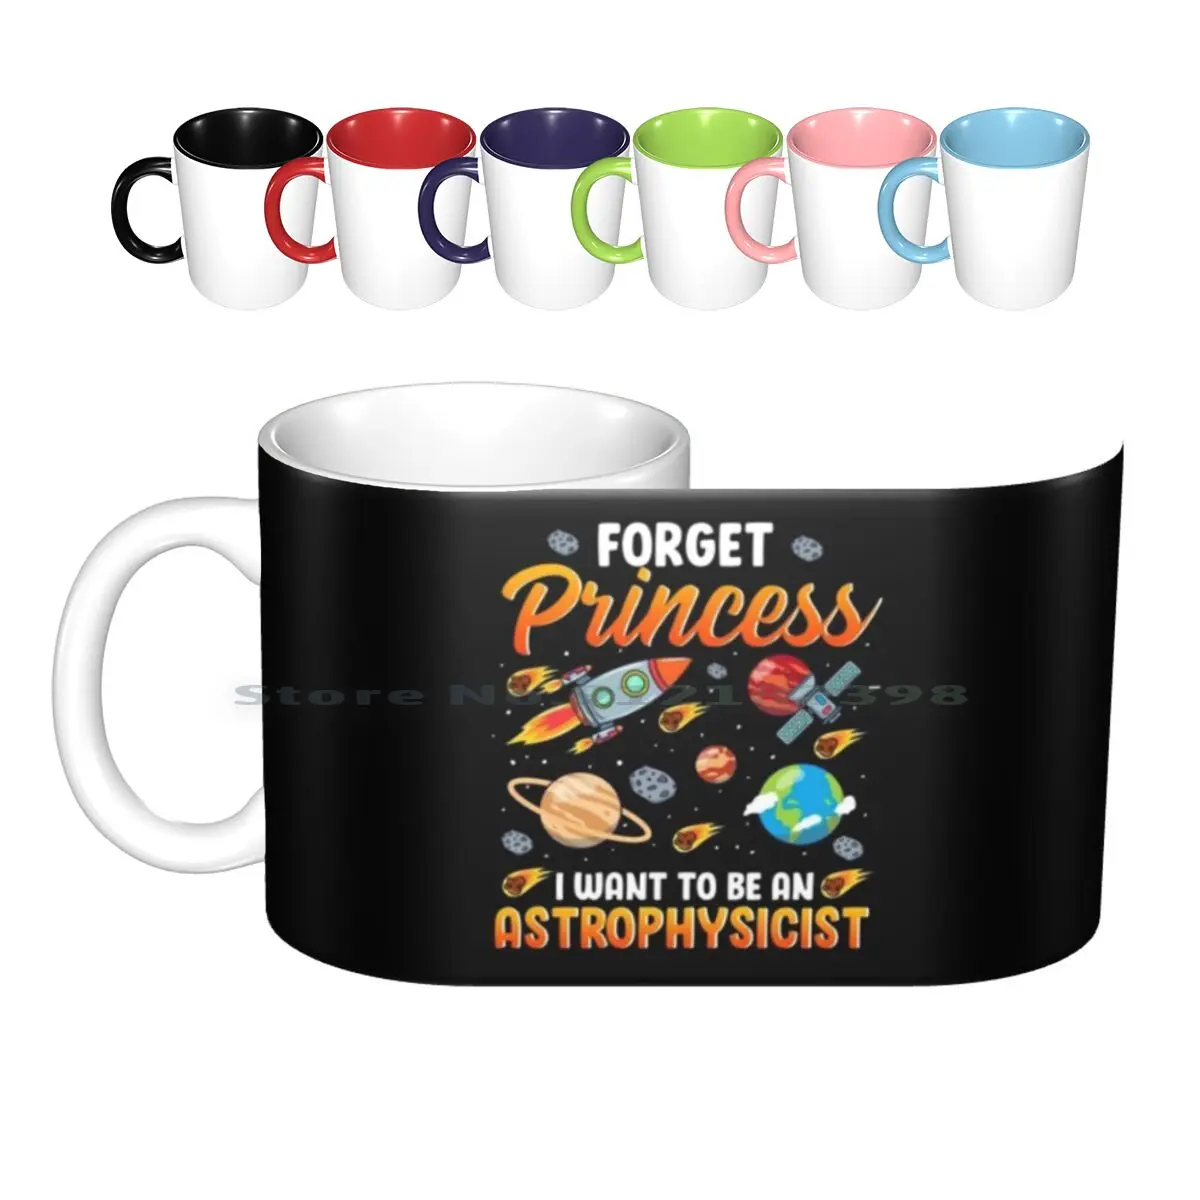 

Forget Princess I Want To Be An Astrophysicist Ceramic Mugs Coffee Cups Milk Tea Mug Forget Princess I Want To Be An